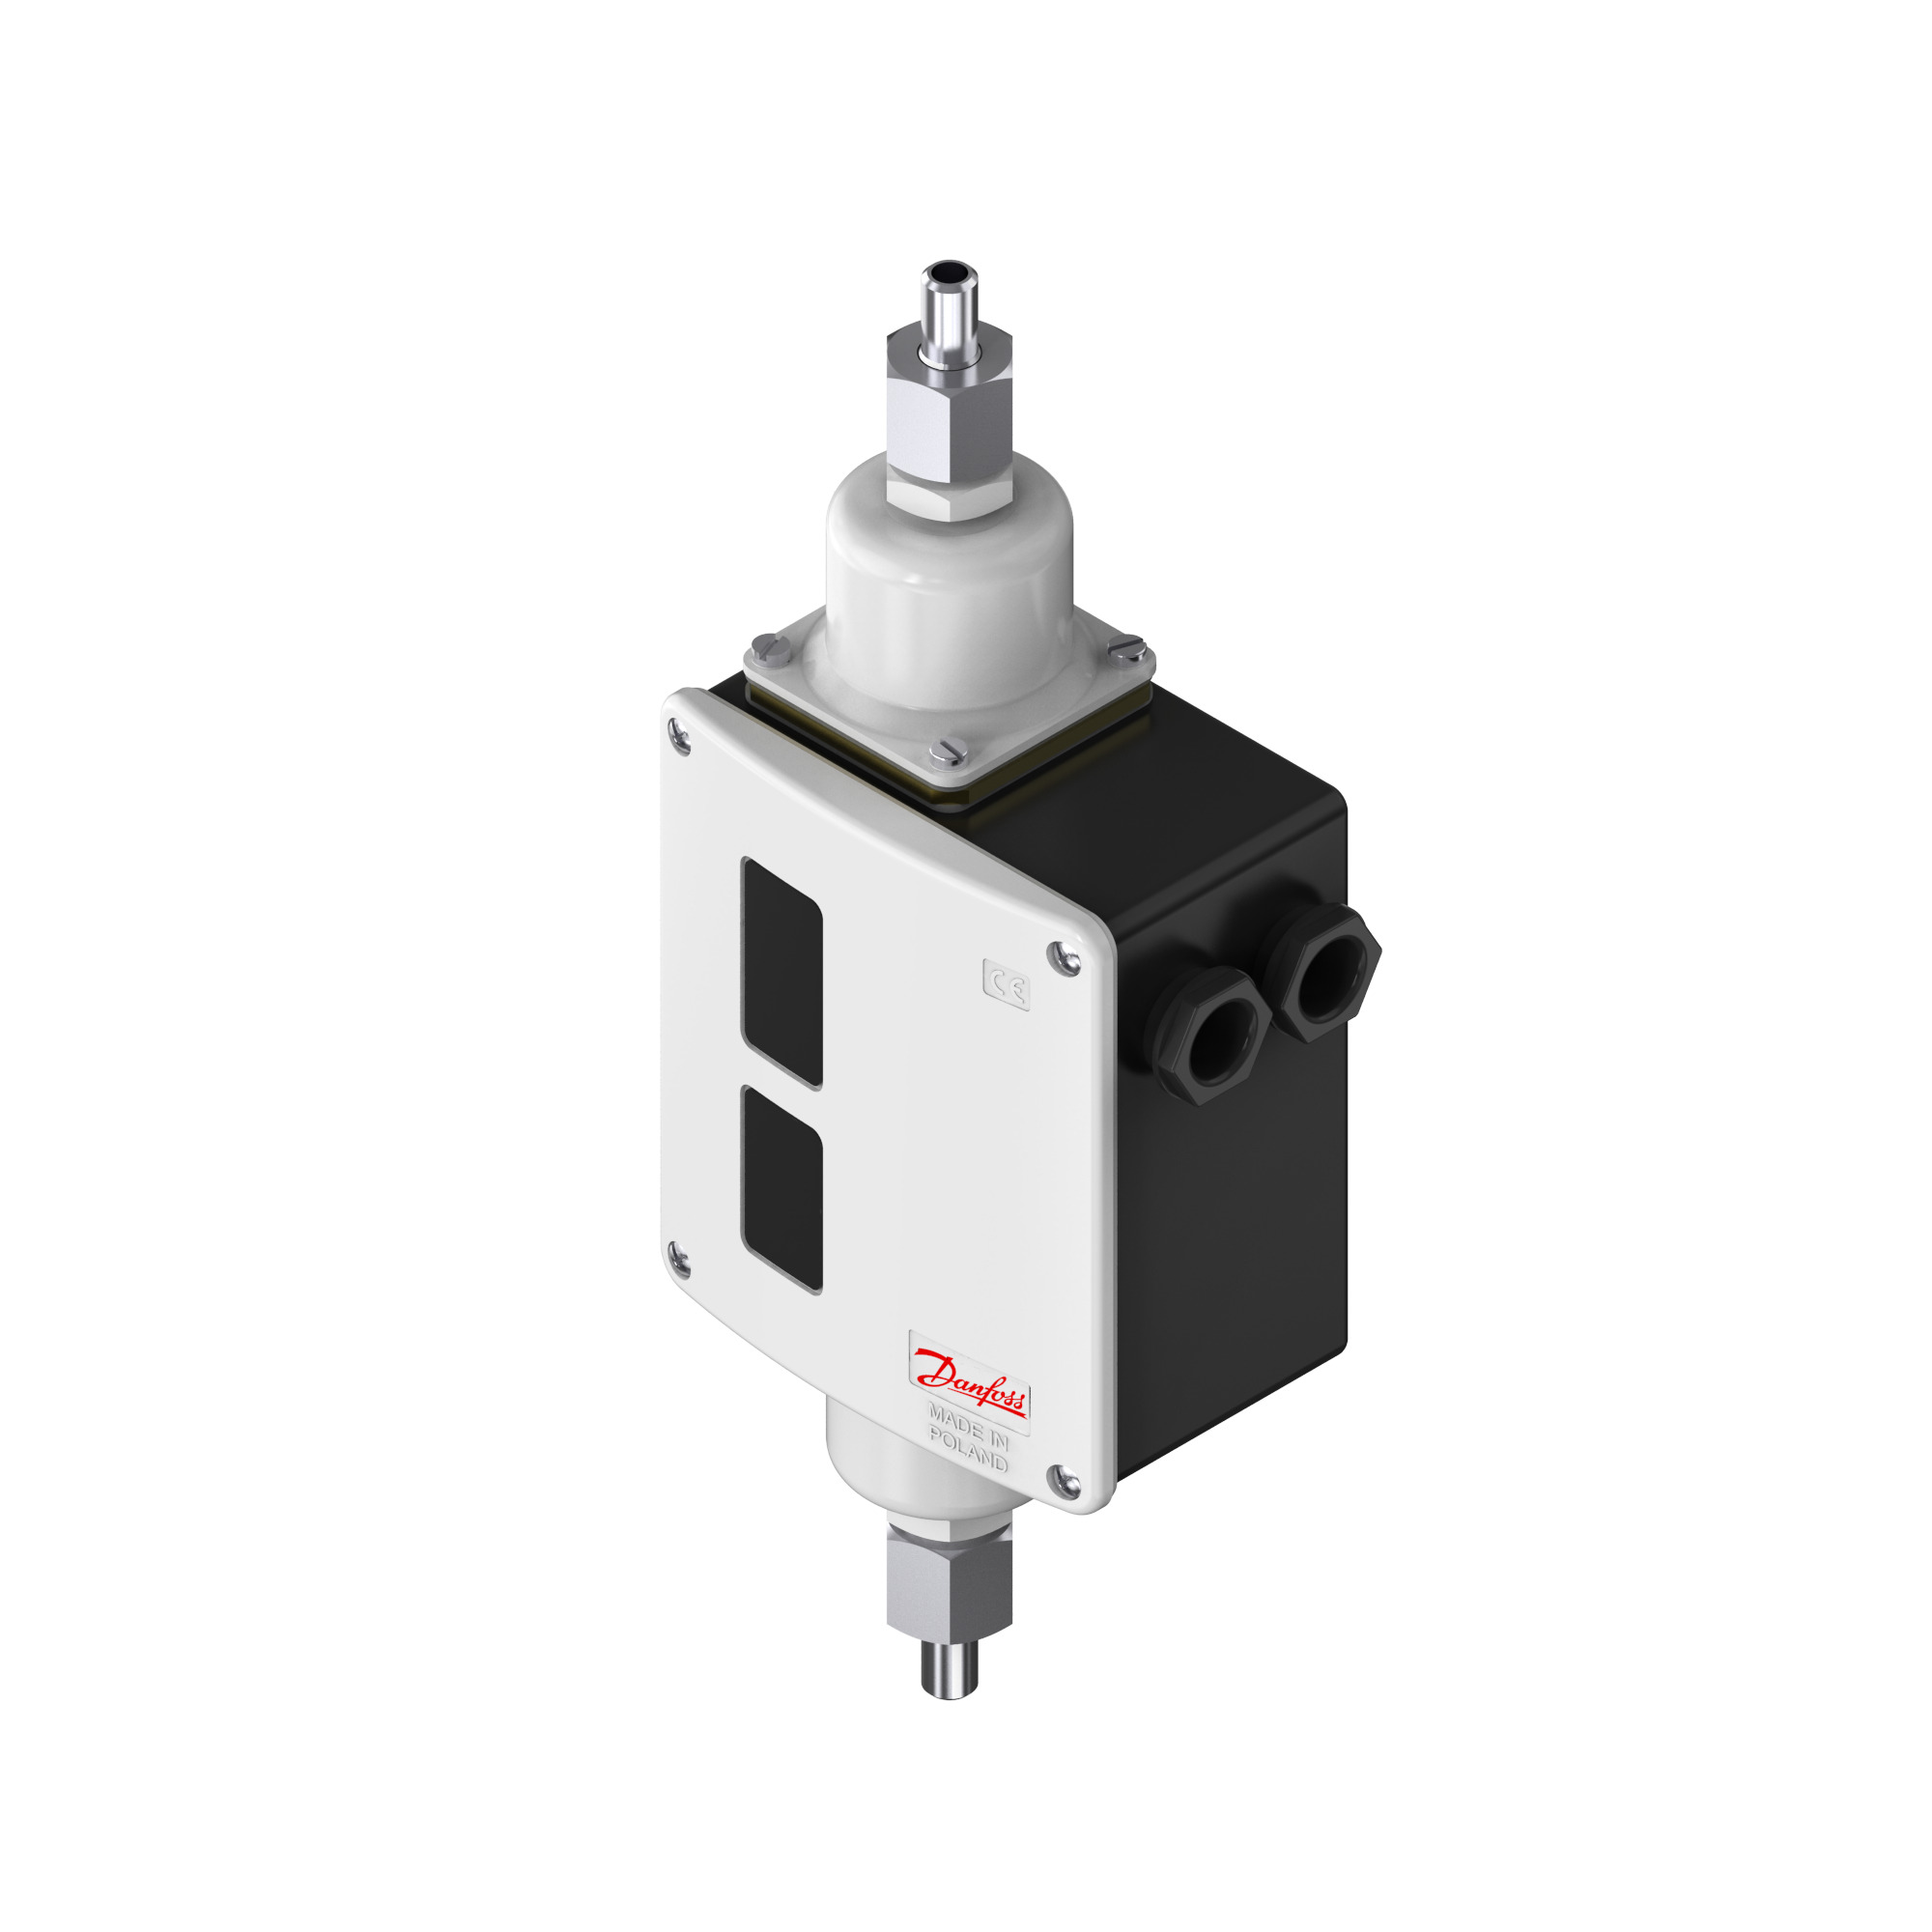 Differential pressure switch, RT262A